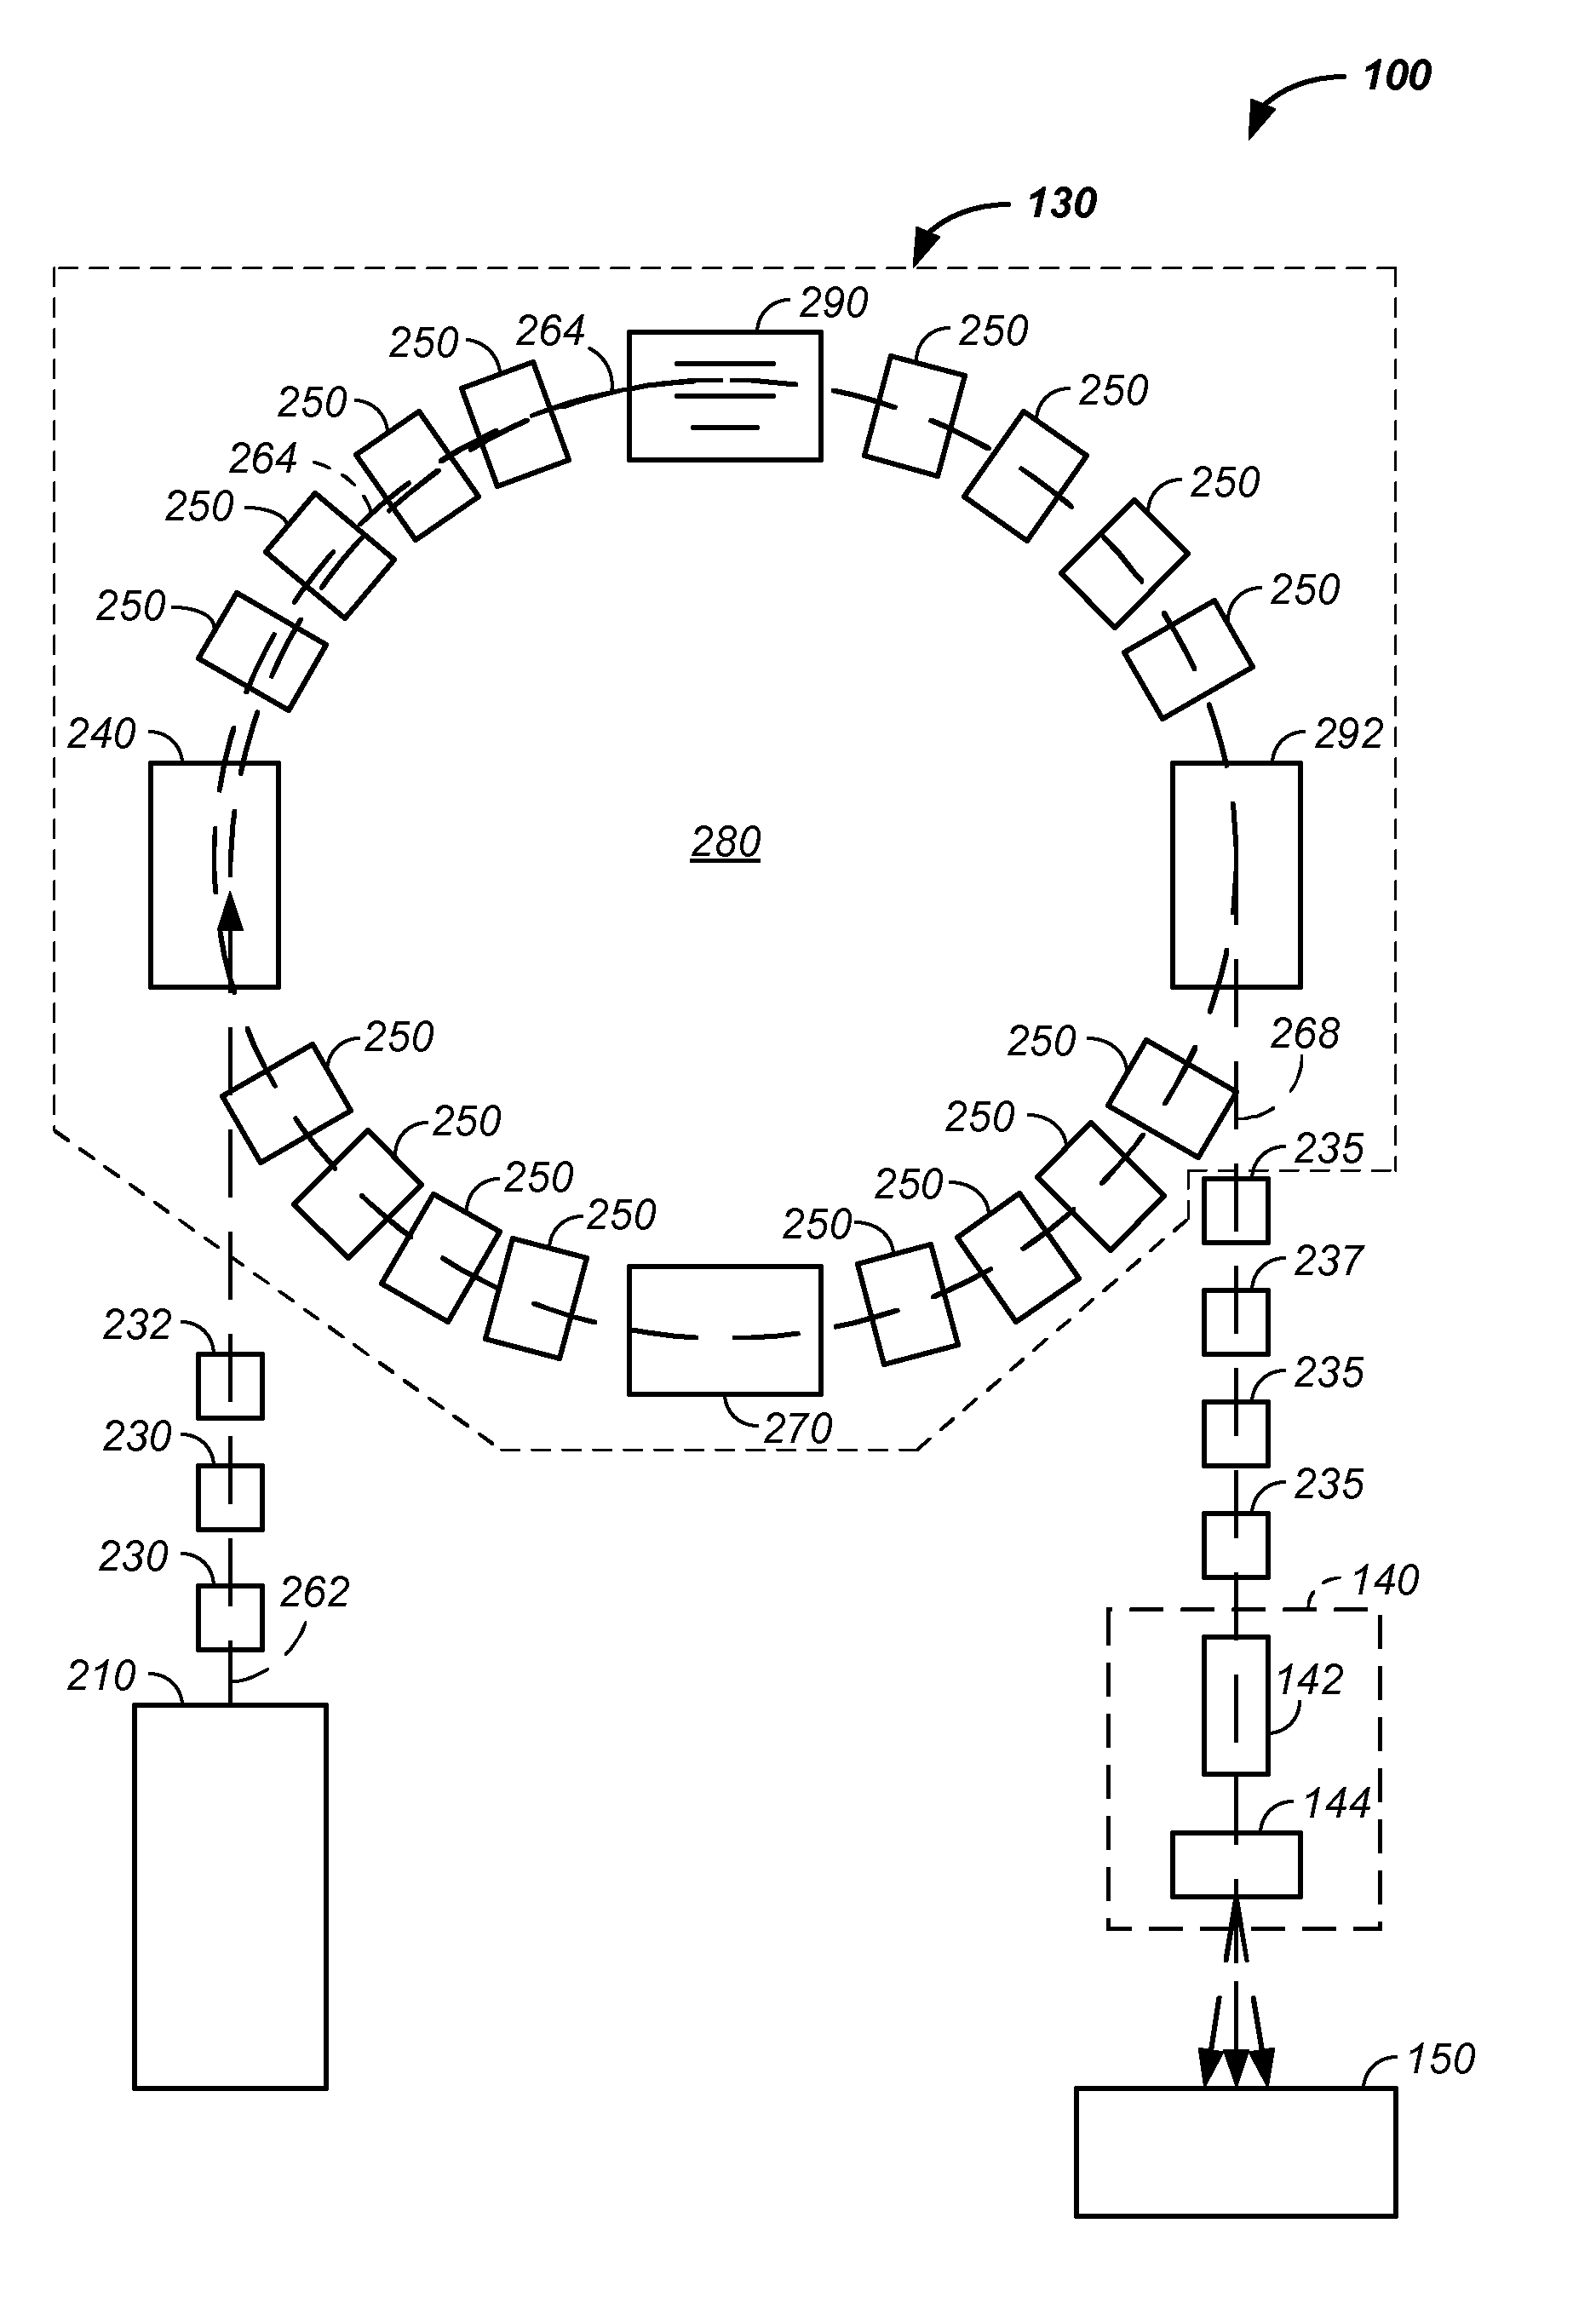 Magnetic field control method and apparatus used in conjunction with a charged particle cancer therapy system